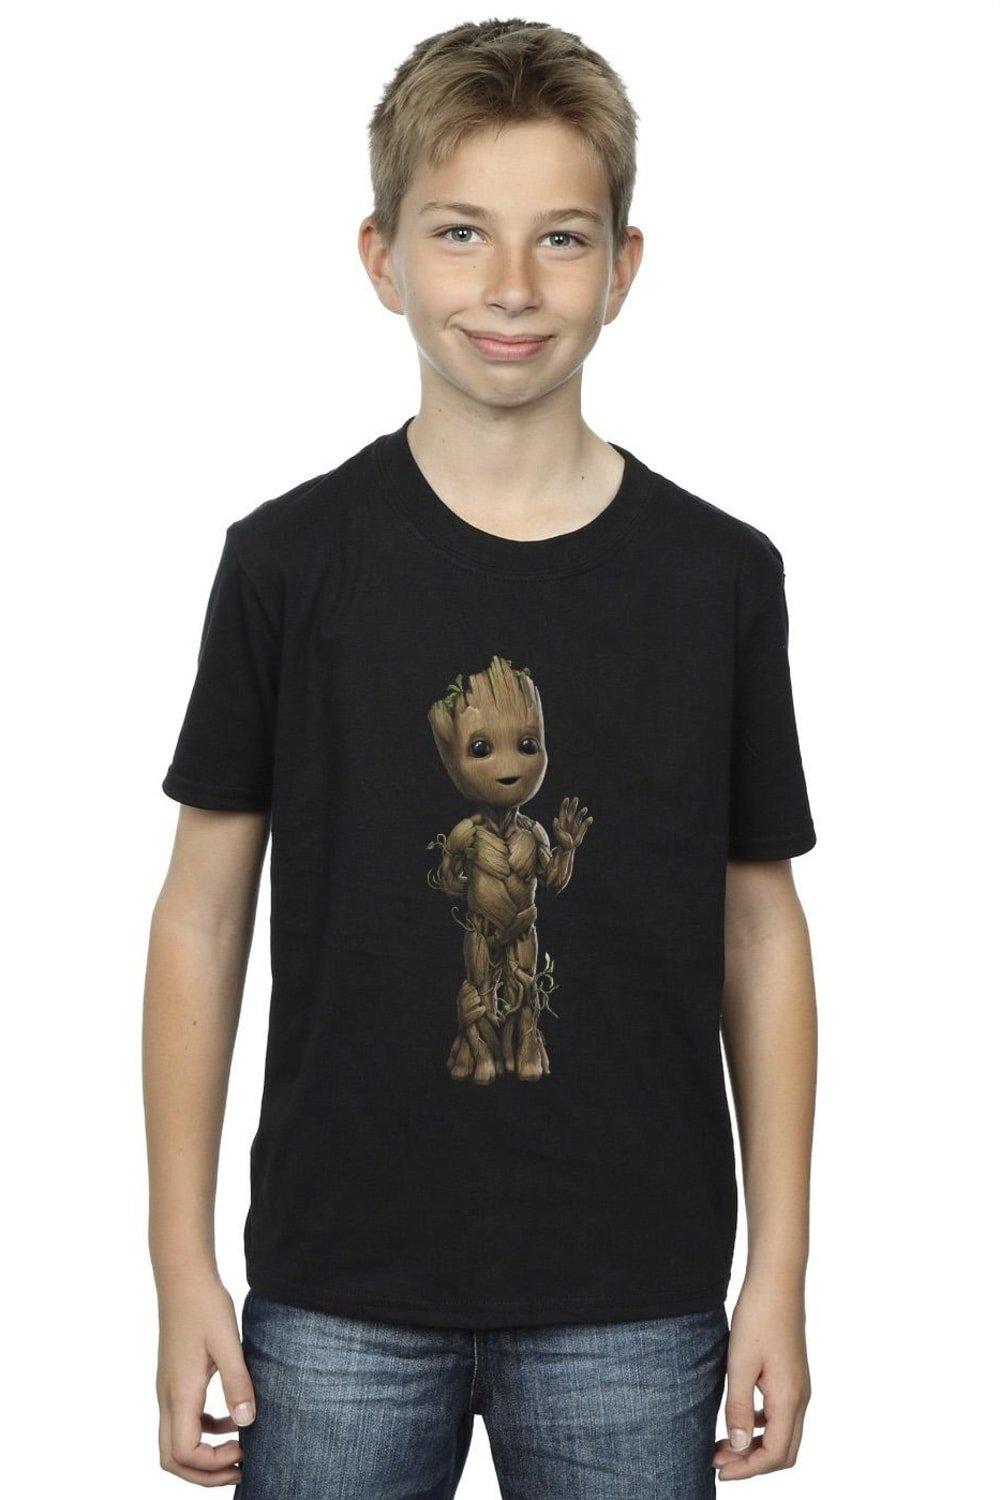 I Am Groot Wave Pose T-Shirt